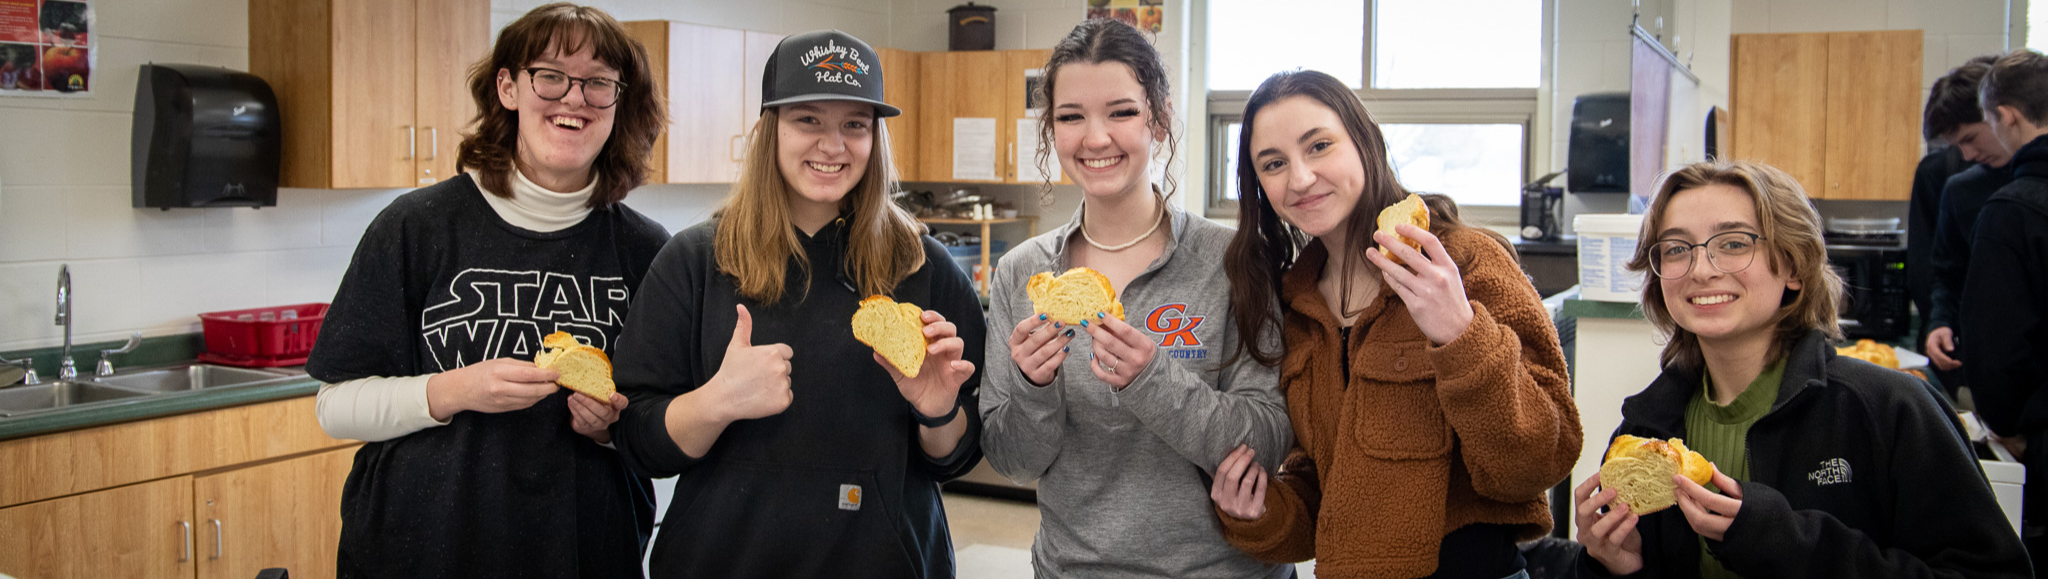 image of students enjoying Challah bread they made